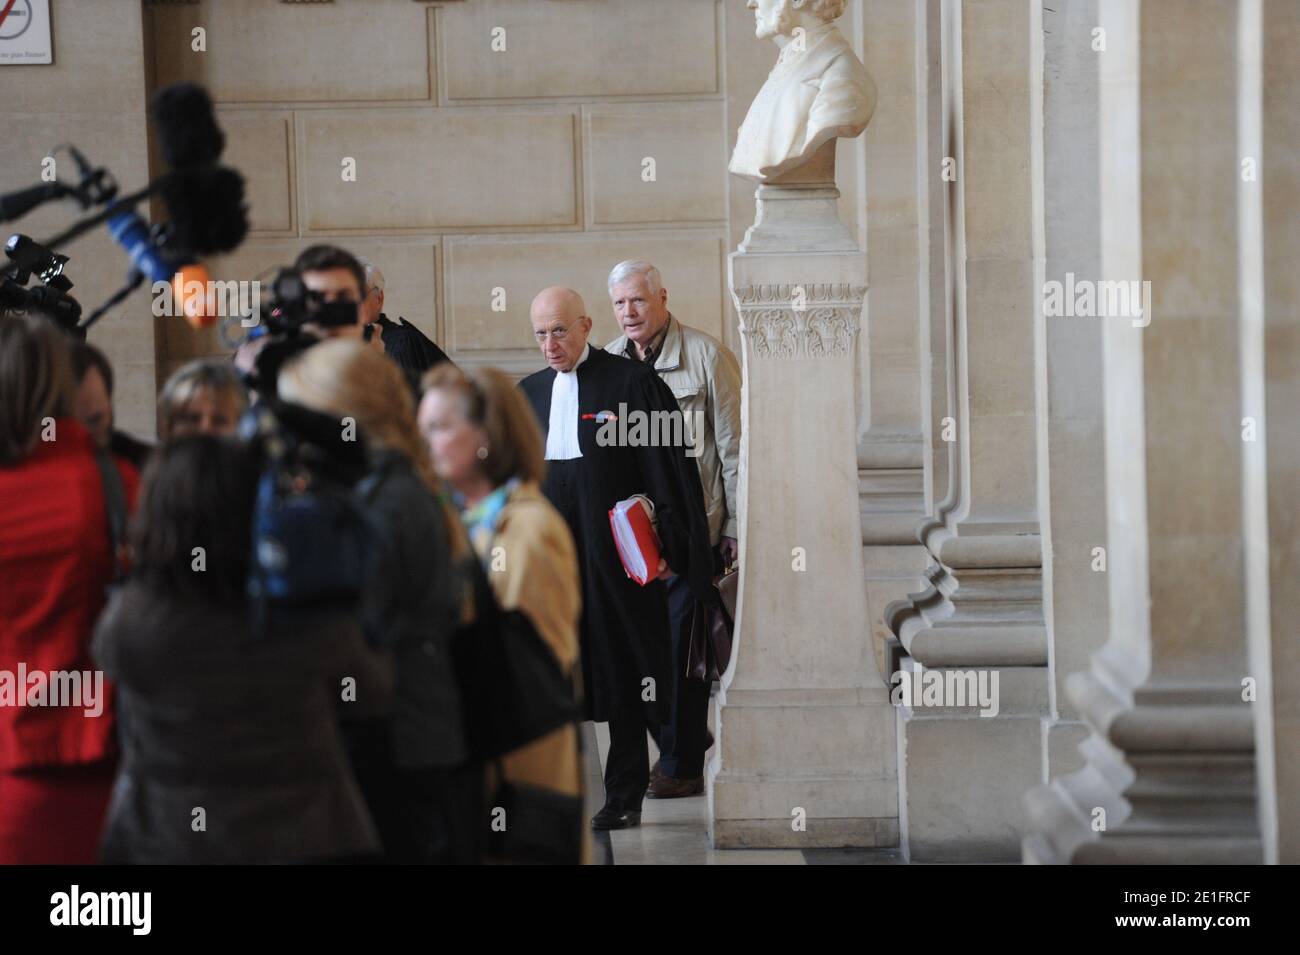 Frenchman Andre Bamberski arrives with his lawyer Francois Gibault at the Palais de Justice to attend German cardiologist Dieter Krombach's trial for the murder of Kalinka Bamberski, in Paris, France on March 29, 2011. The German doctor is accused of having raped and killed his then 14-year-old stepdaughter, Kalinka Bamberski, in the summer of 1982 while she was holidaying with her mother at Krombach's home at Lake Constance, southern Germany. A court in Germany ruled that Krombach could not be held responsible for the death, but in 1995 a court in Paris found the doctor guilty of manslaughter Stock Photo